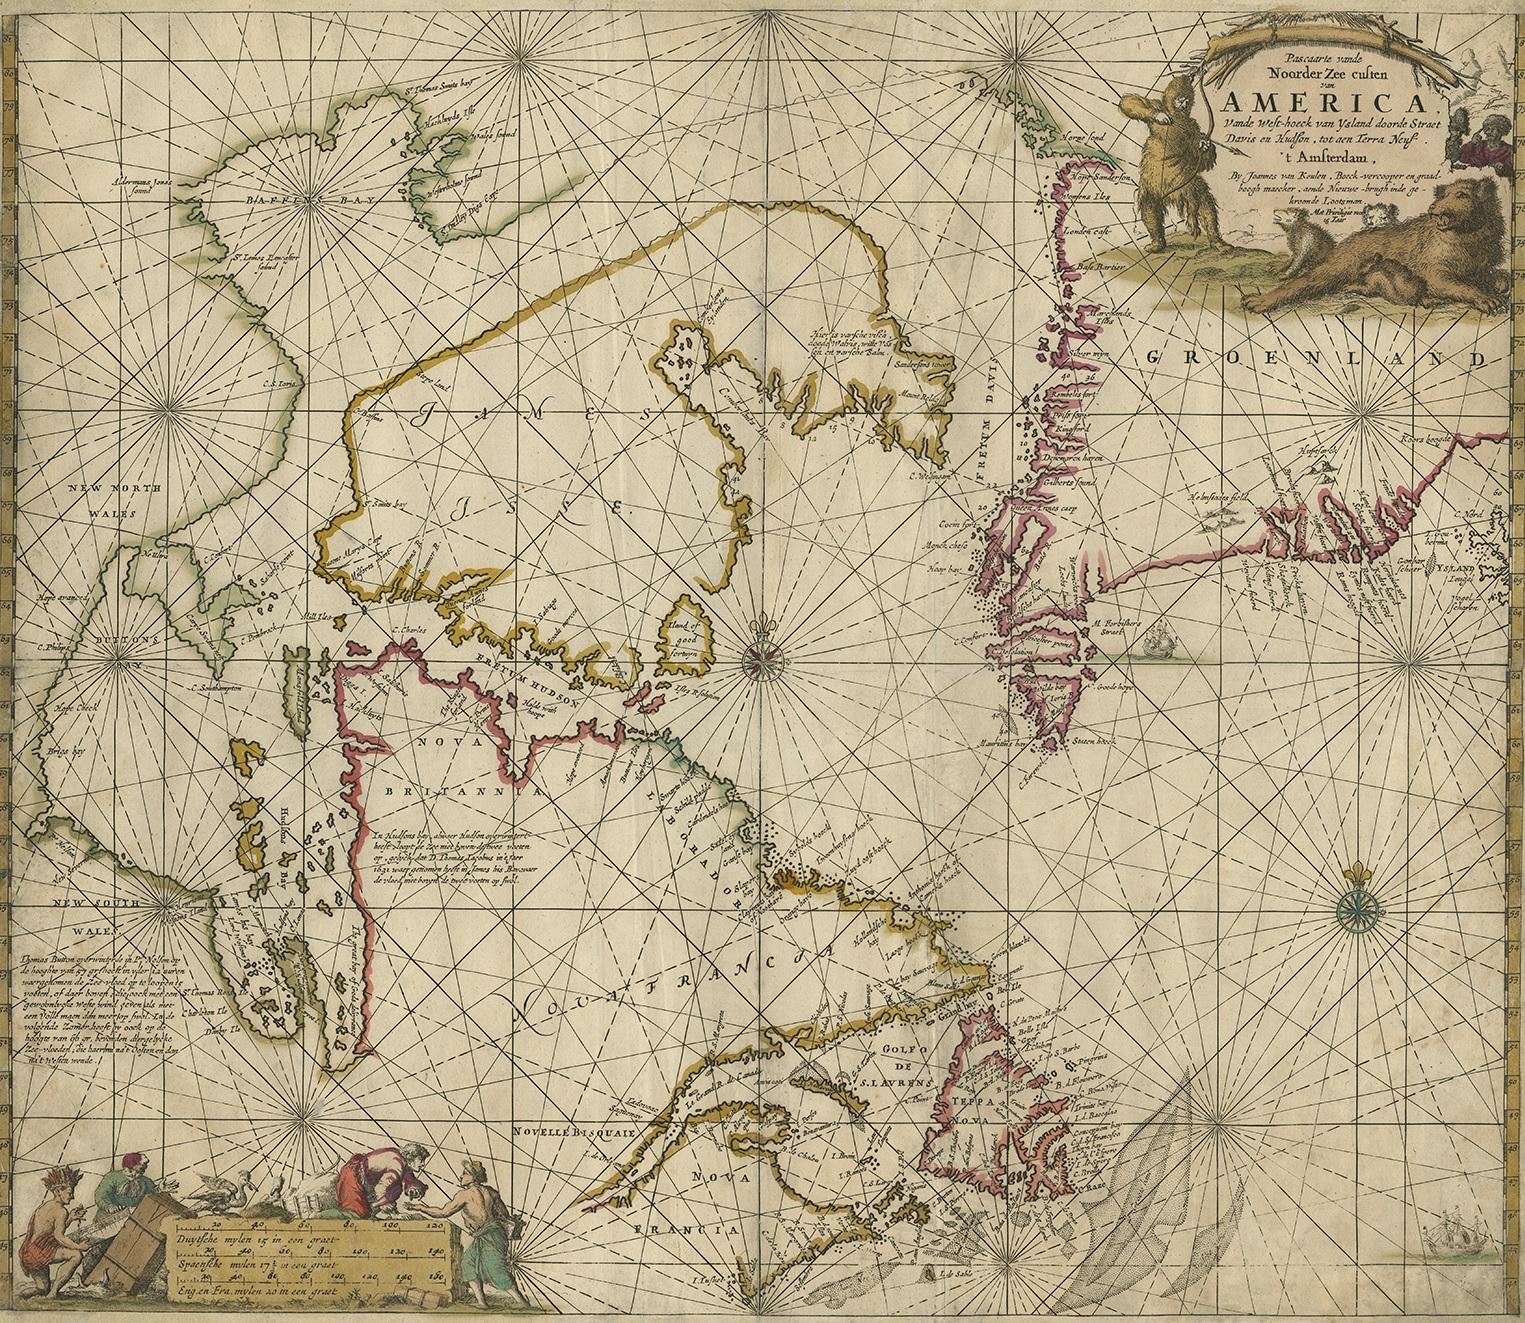 Antique map titled 'Pascaarte vande Noorderzee Custen van America (..)'. Sea chart of Hudson Bay and Arctic Canada. Compass roses, loxodromic lines, and ships decorate the oceans and both the title and distance scale are embellished with scene of